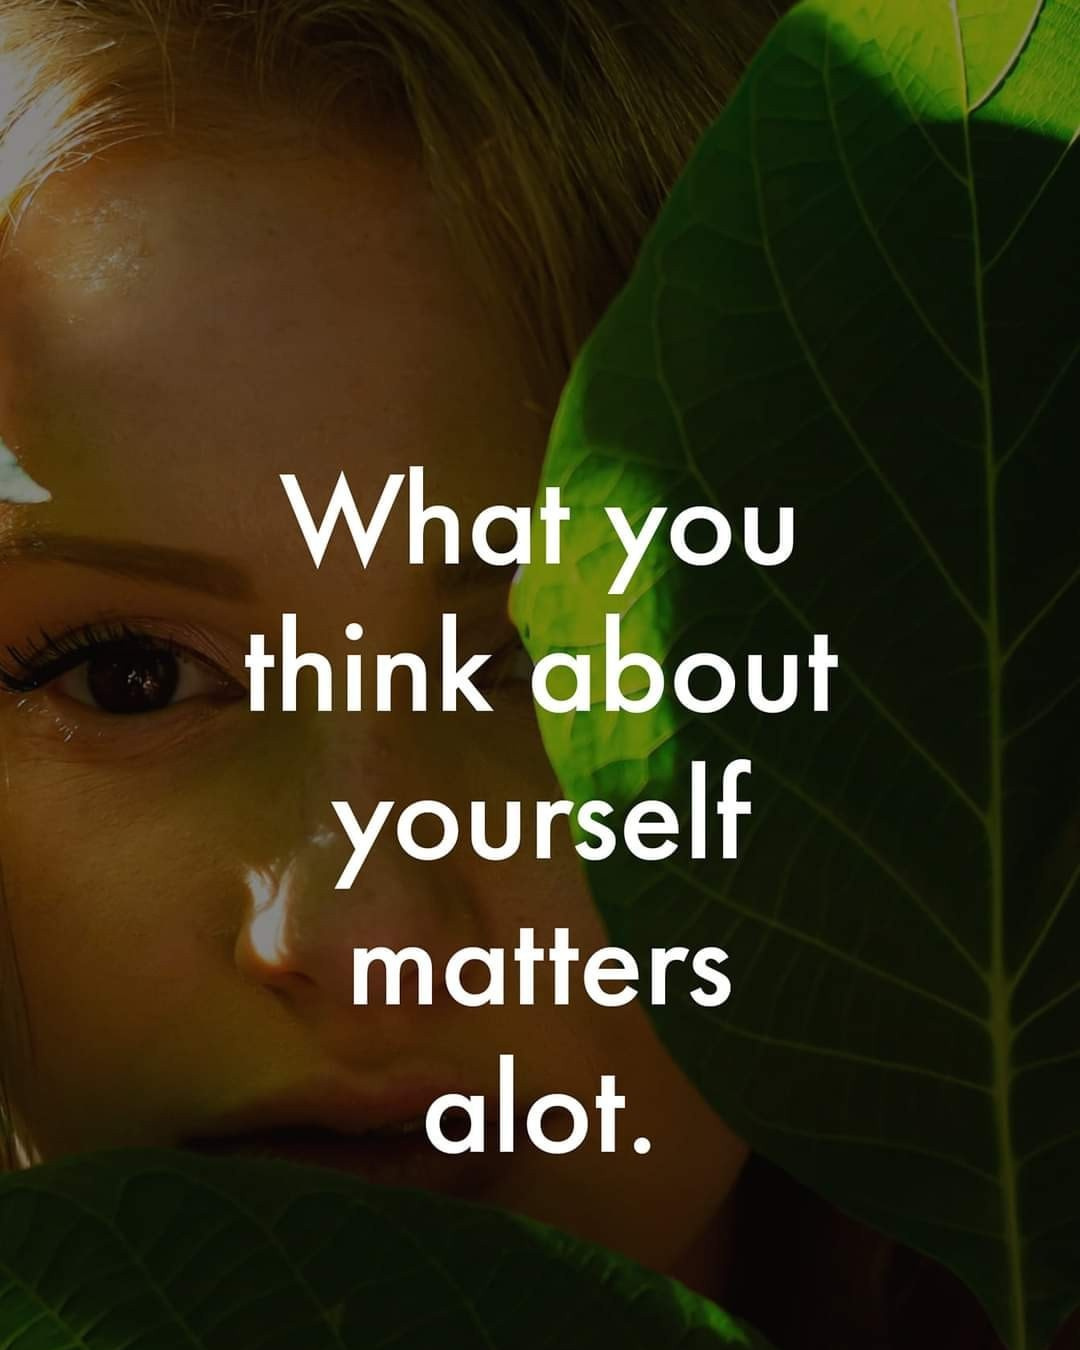 What you think about yourself matters alot.